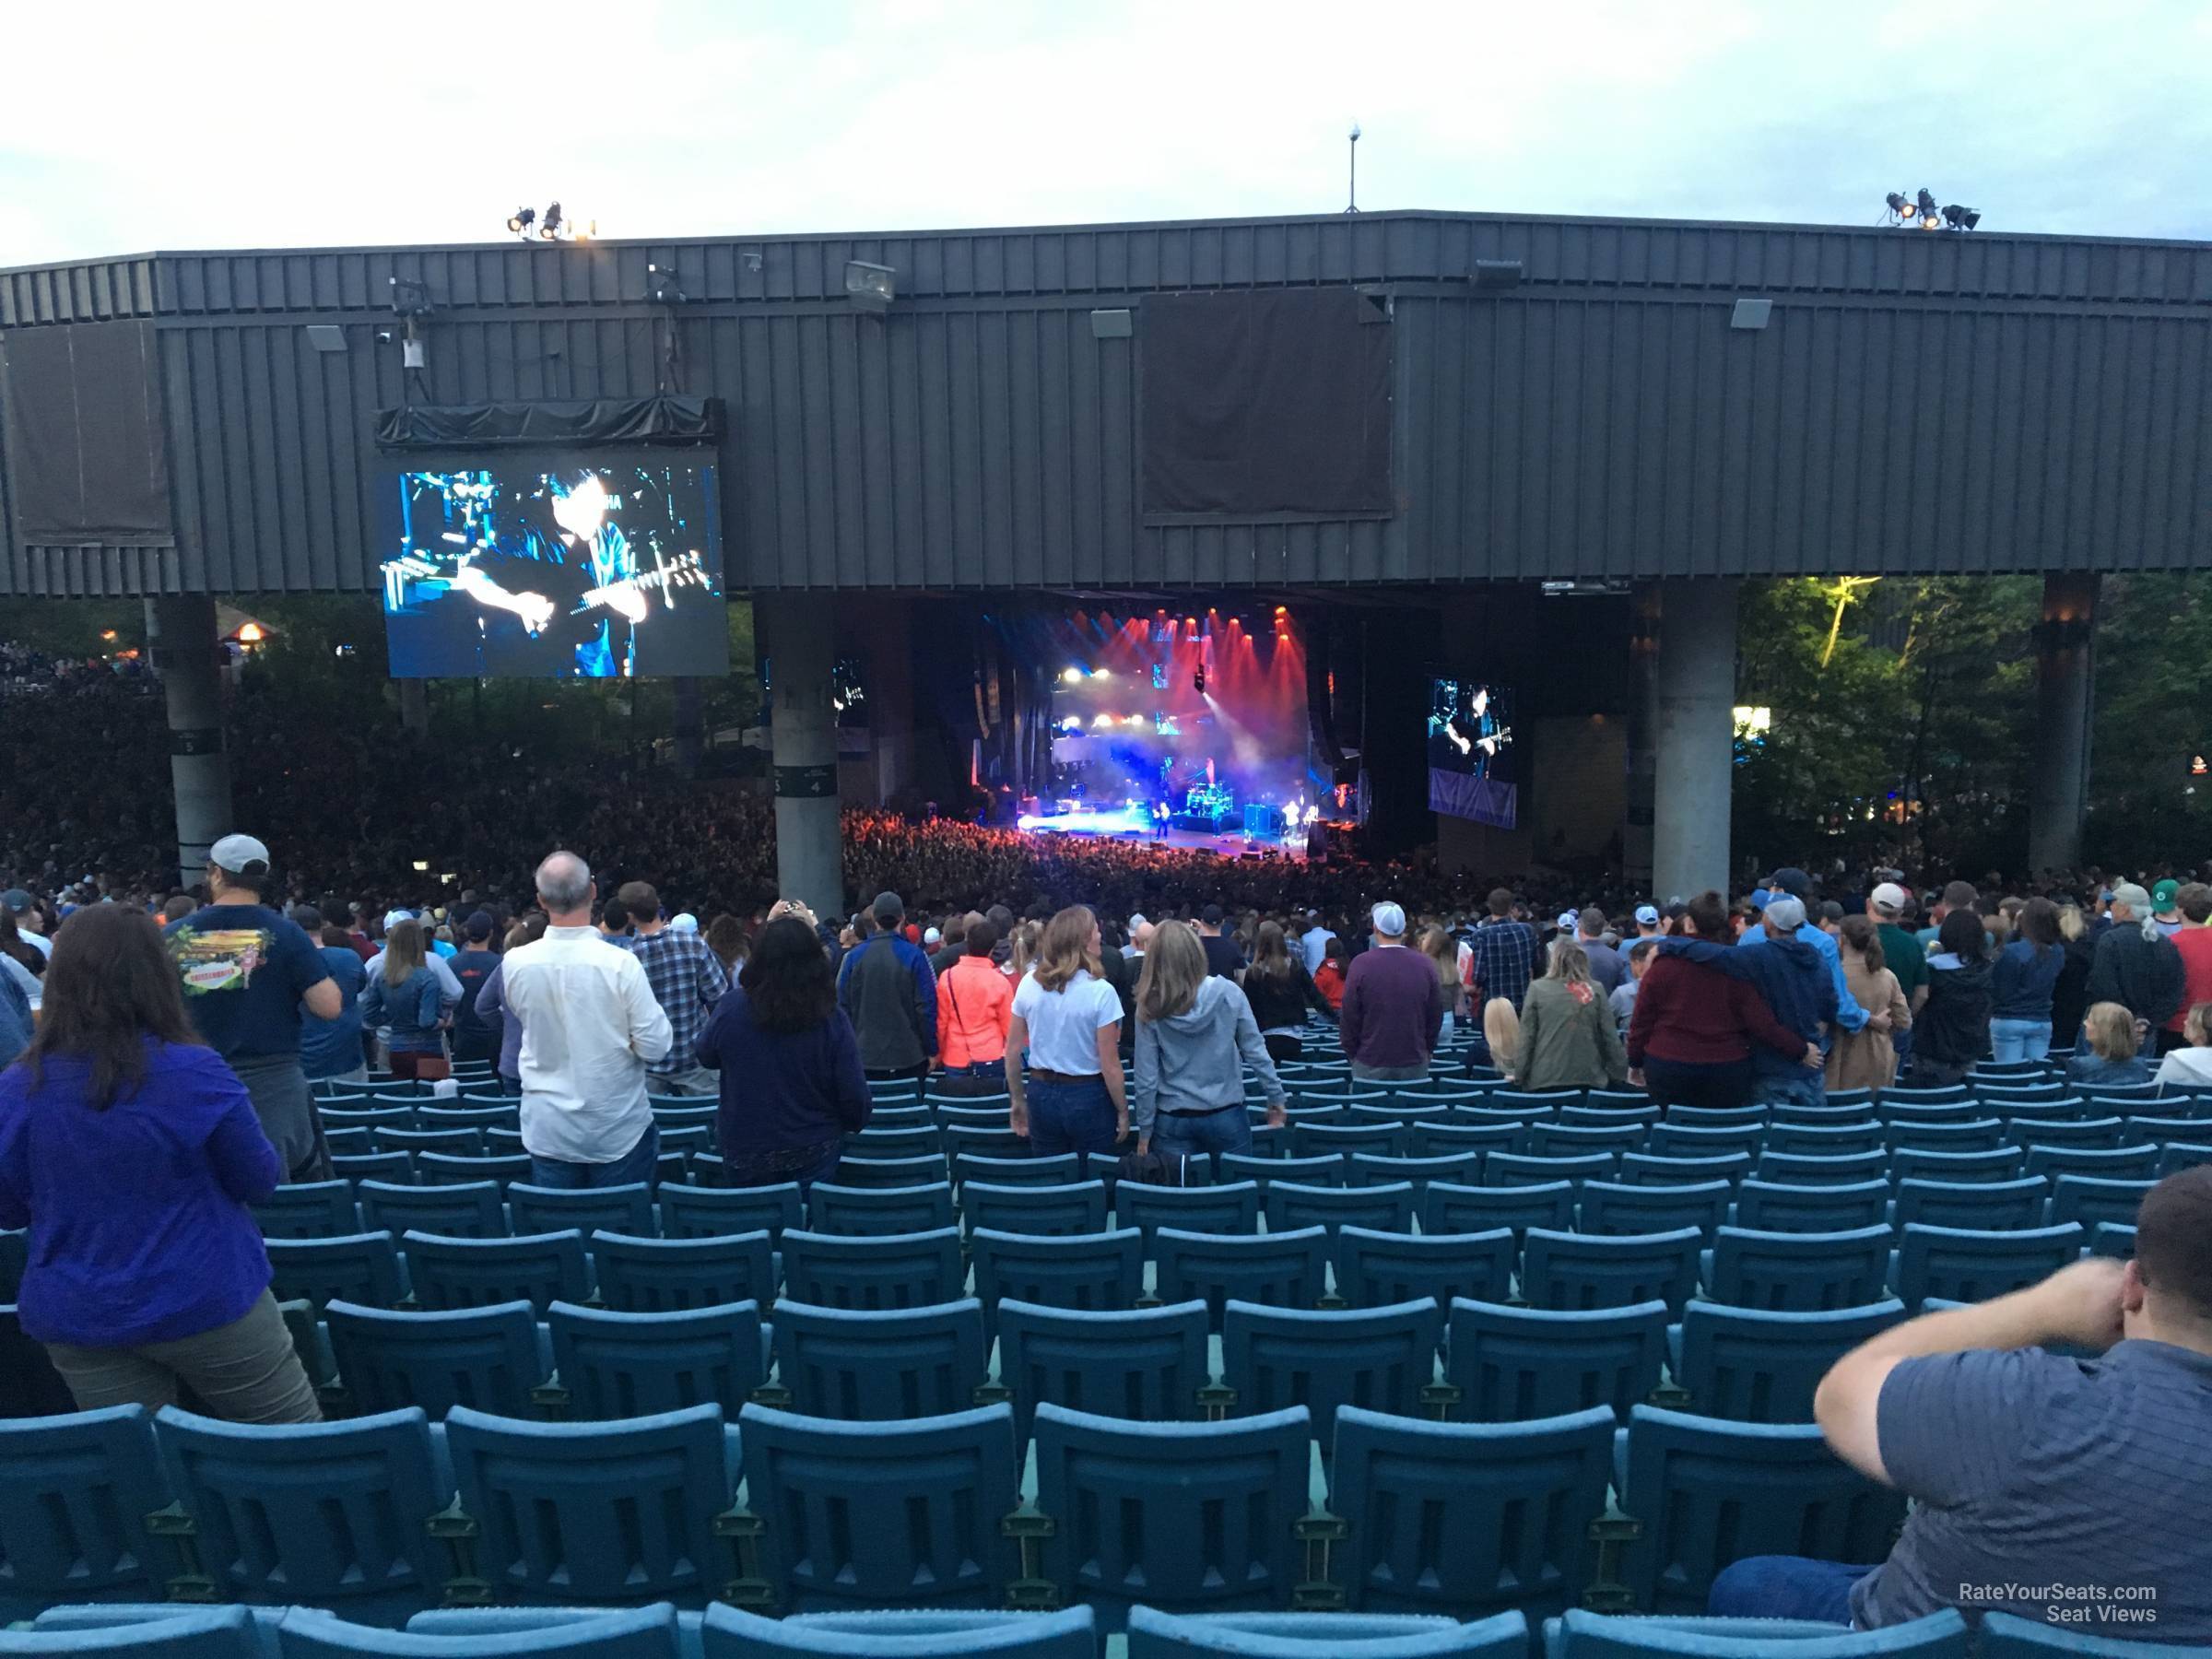 section 10, row y seat view  - xfinity center (mansfield)